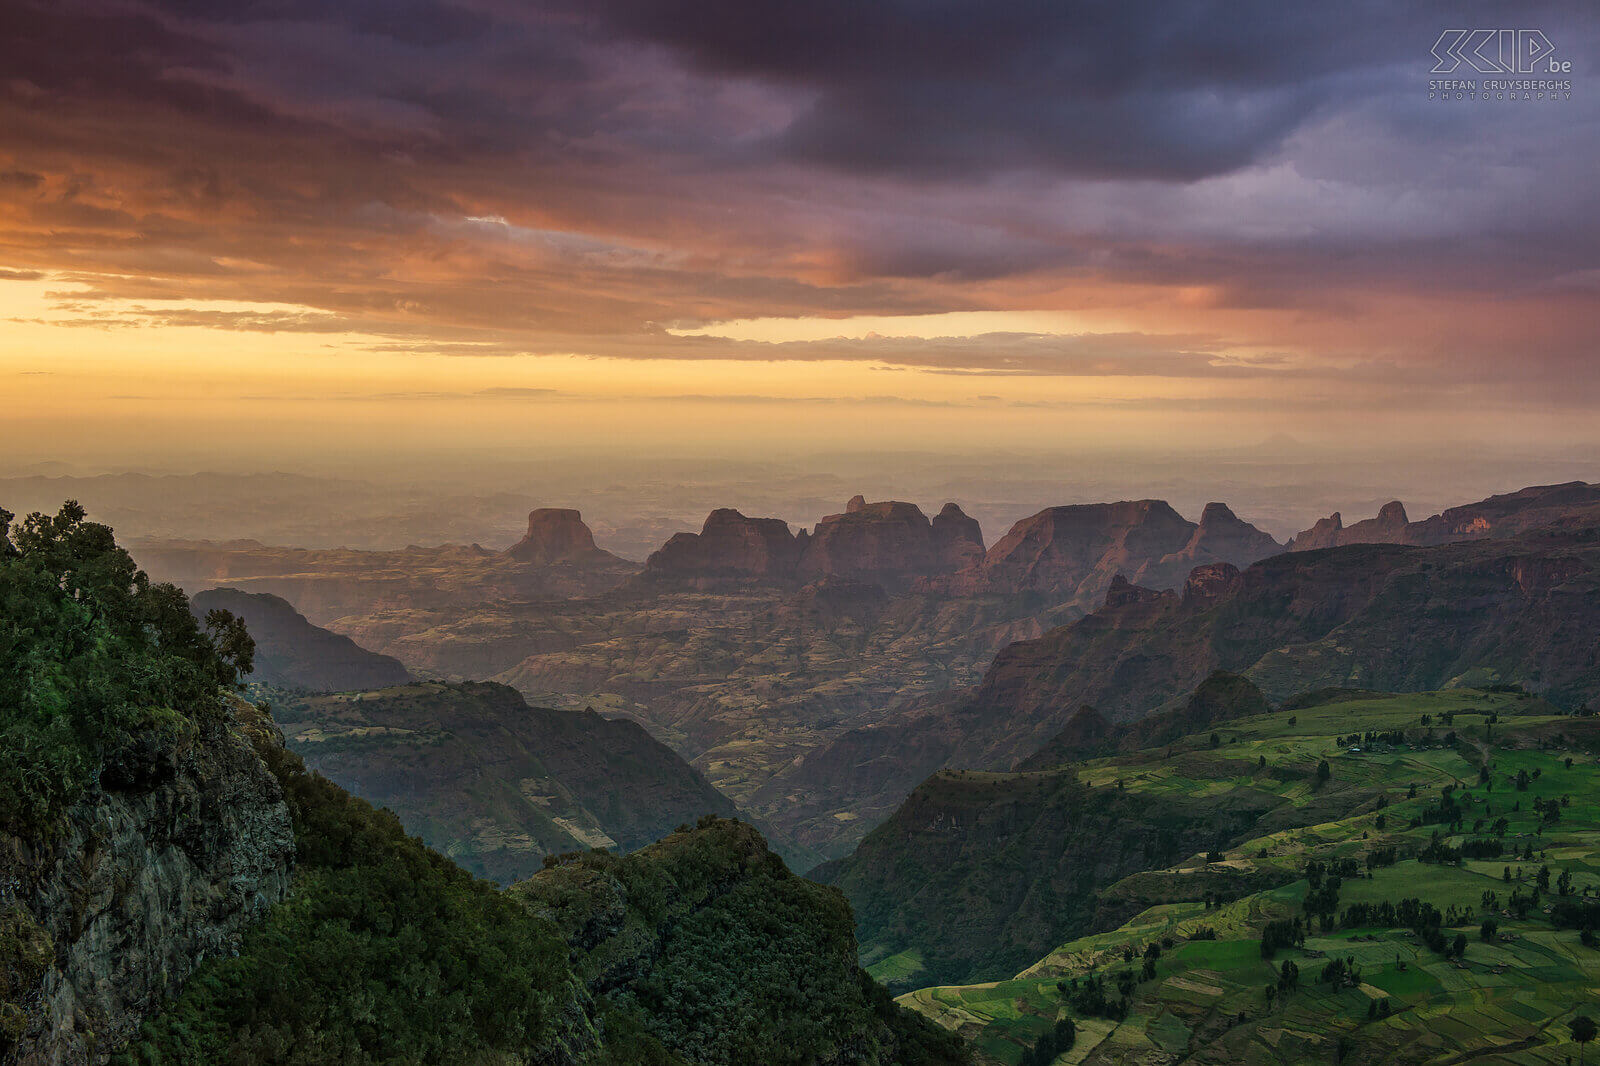 Simien Mountains - Ghenek - Sunset Beautiful sunset at the cliffs near the campsite of Chenek. Stefan Cruysberghs